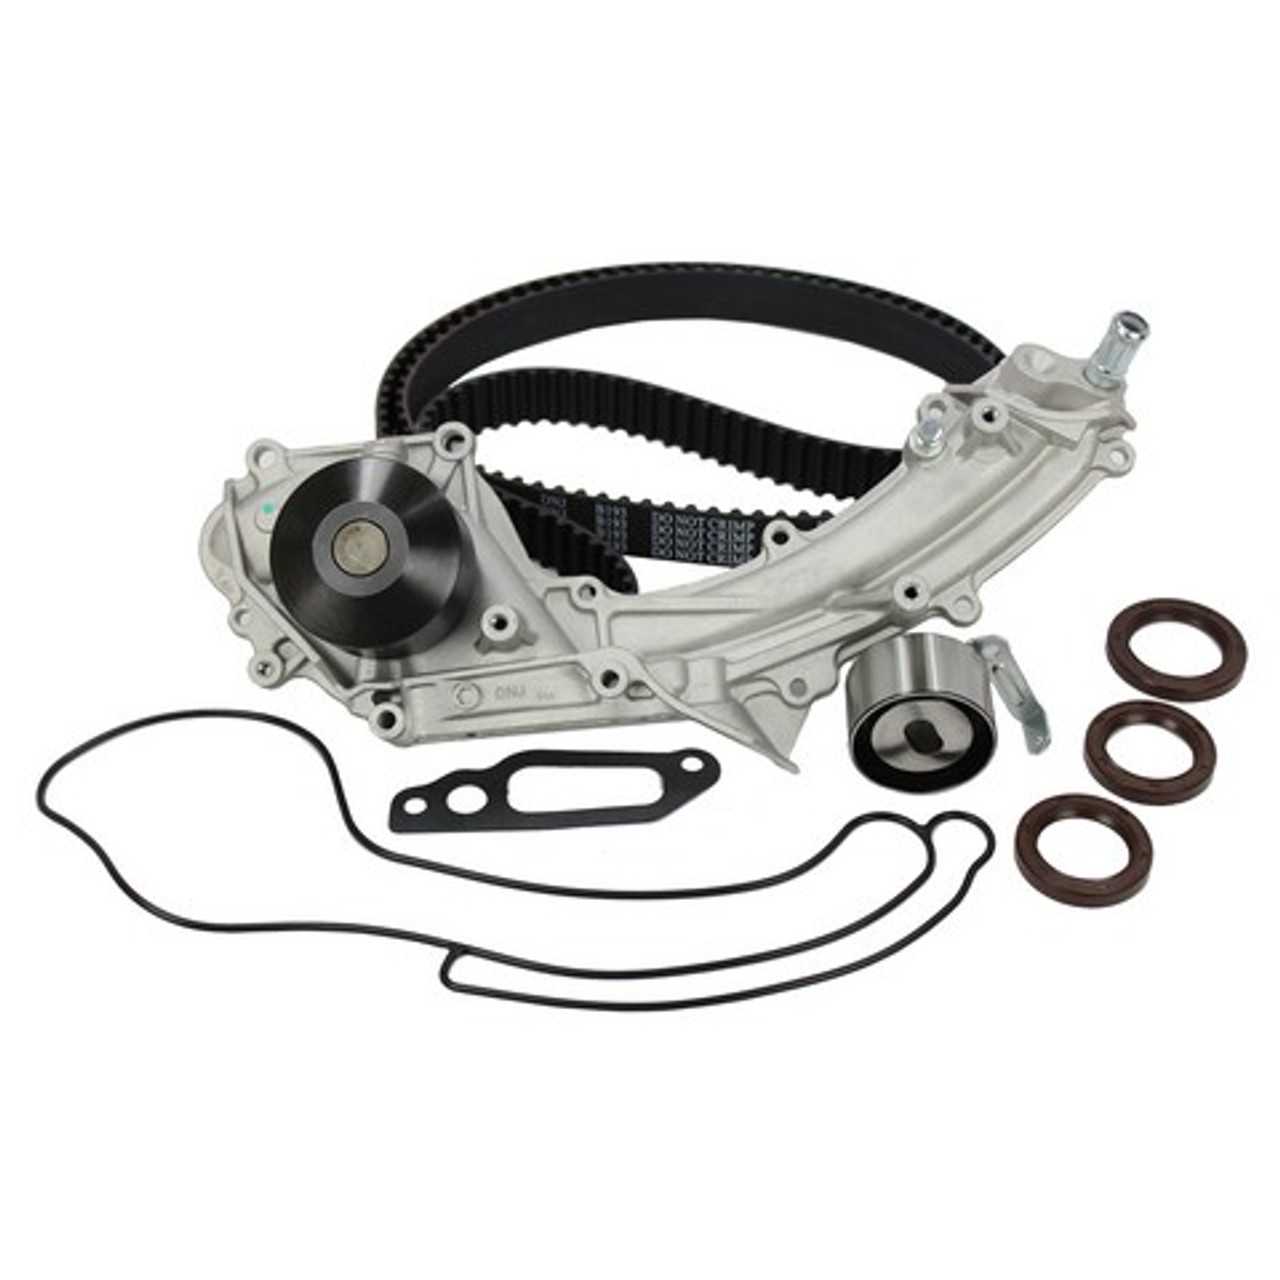 Timing Belt Kit with Water Pump 3.2L 1995 Acura Legend - TBK282AWP.5